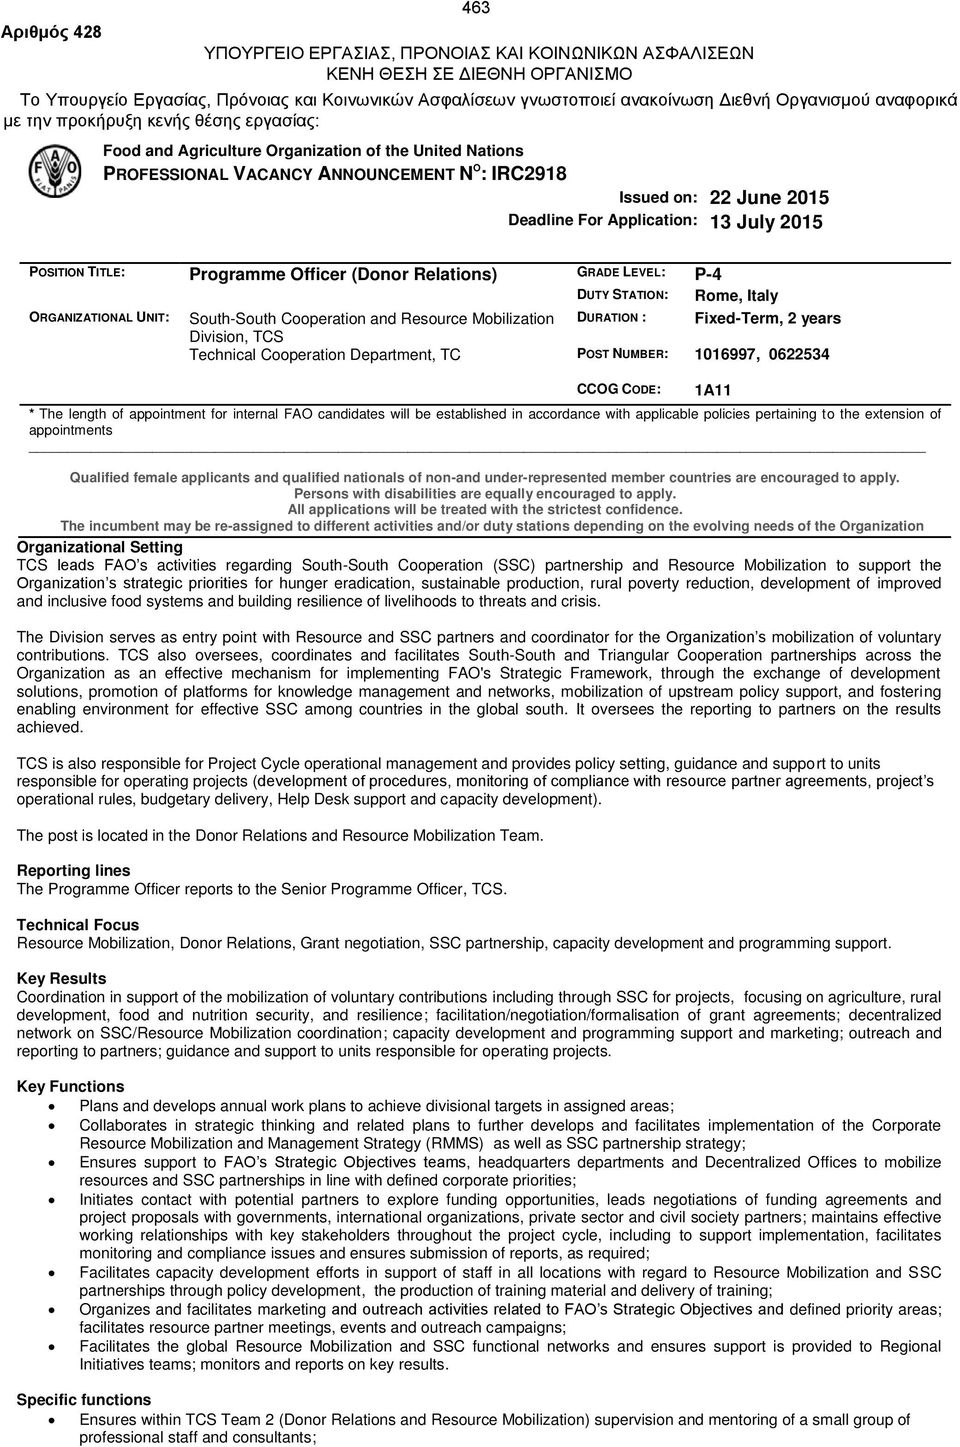 Application: 13 July 2015 POSITION TITLE: Programme Officer (Donor Relations) GRADE LEVEL: P-4 DUTY STATION: Rome, Italy ORGANIZATIONAL UNIT: South-South Cooperation and Resource Mobilization